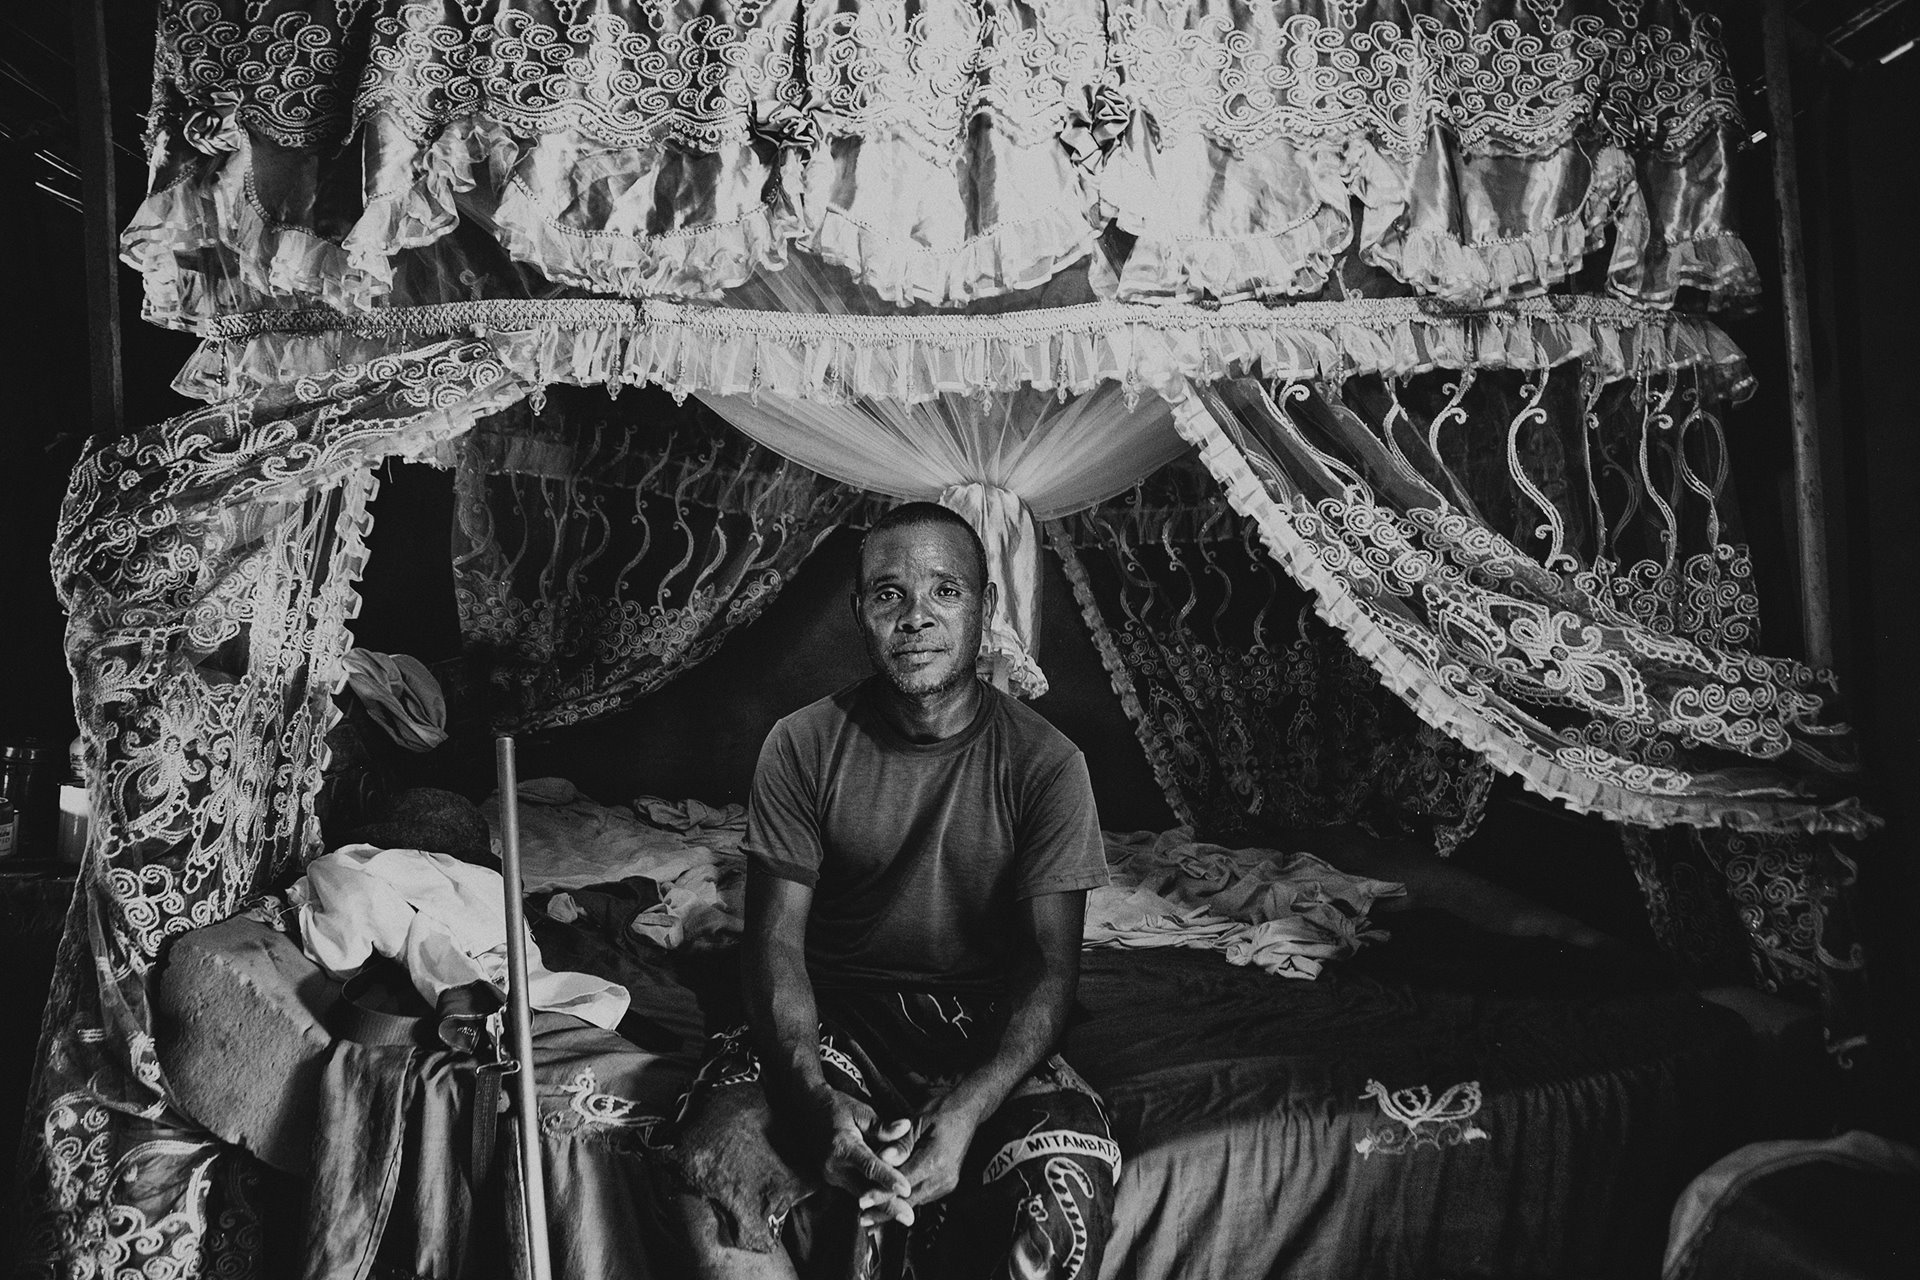 <p>Jean Maximis Nonon sits in his bedroom in Mataviakoho, North Menabe, Bongolava, Madagascar. Military authorities see Nonon as one of the most dangerous dahalo leaders in the region. He is said to own nearly 2,000 cattle and to be able to assemble 200 men on operations to steal zebu. Nonon refuses to be considered a dahalo. He justifies the villagers&rsquo; possession of arms as a means to protect themselves from other dahalo coming from the south of Menabe who, according to him, harass the village.</p>
